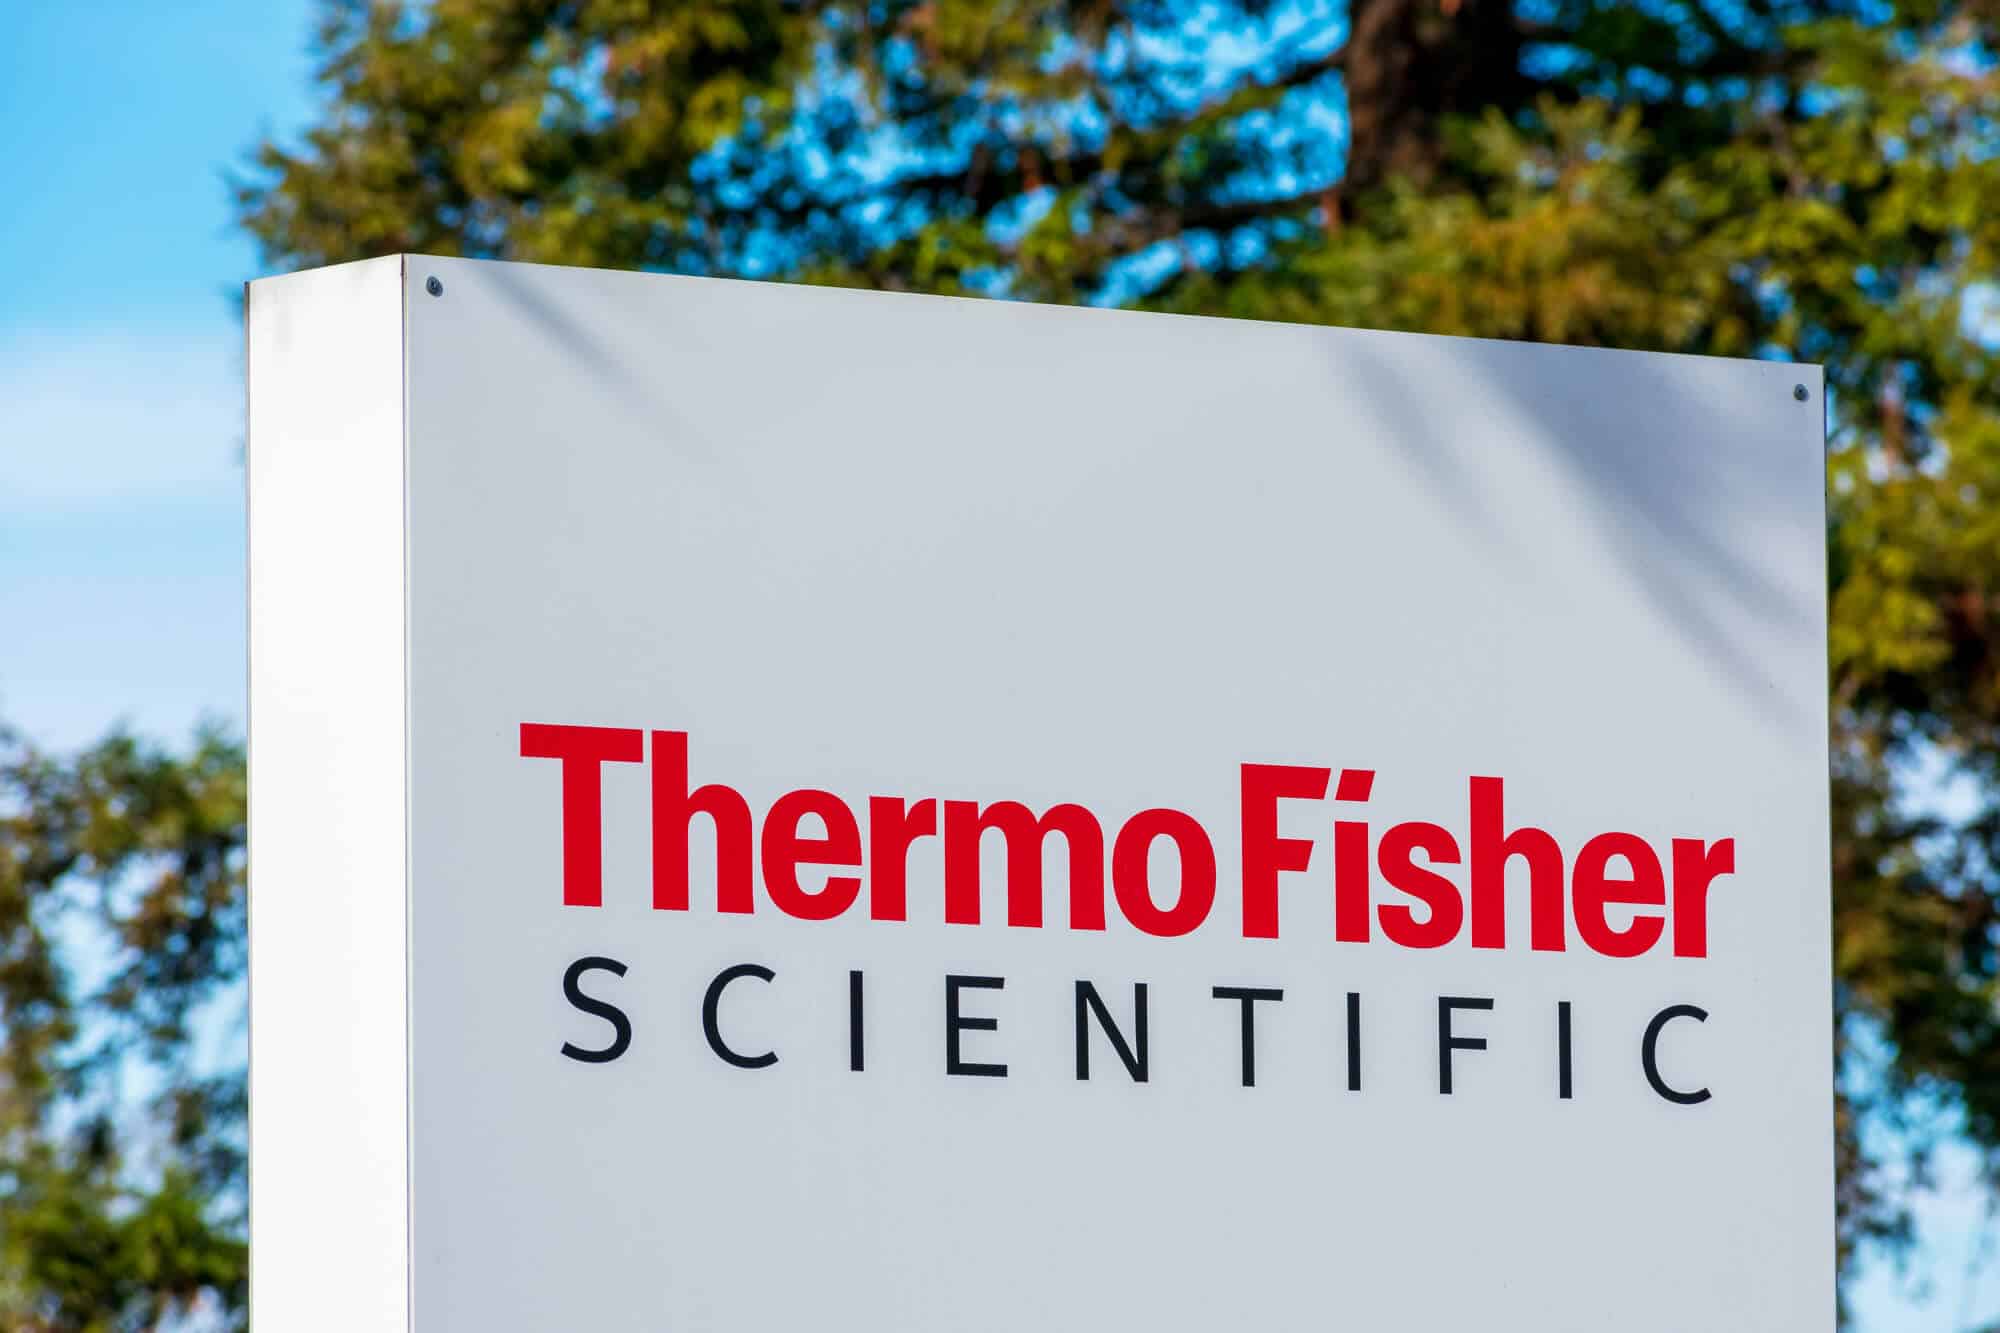 Guide to Working at Thermo Fisher Scientific